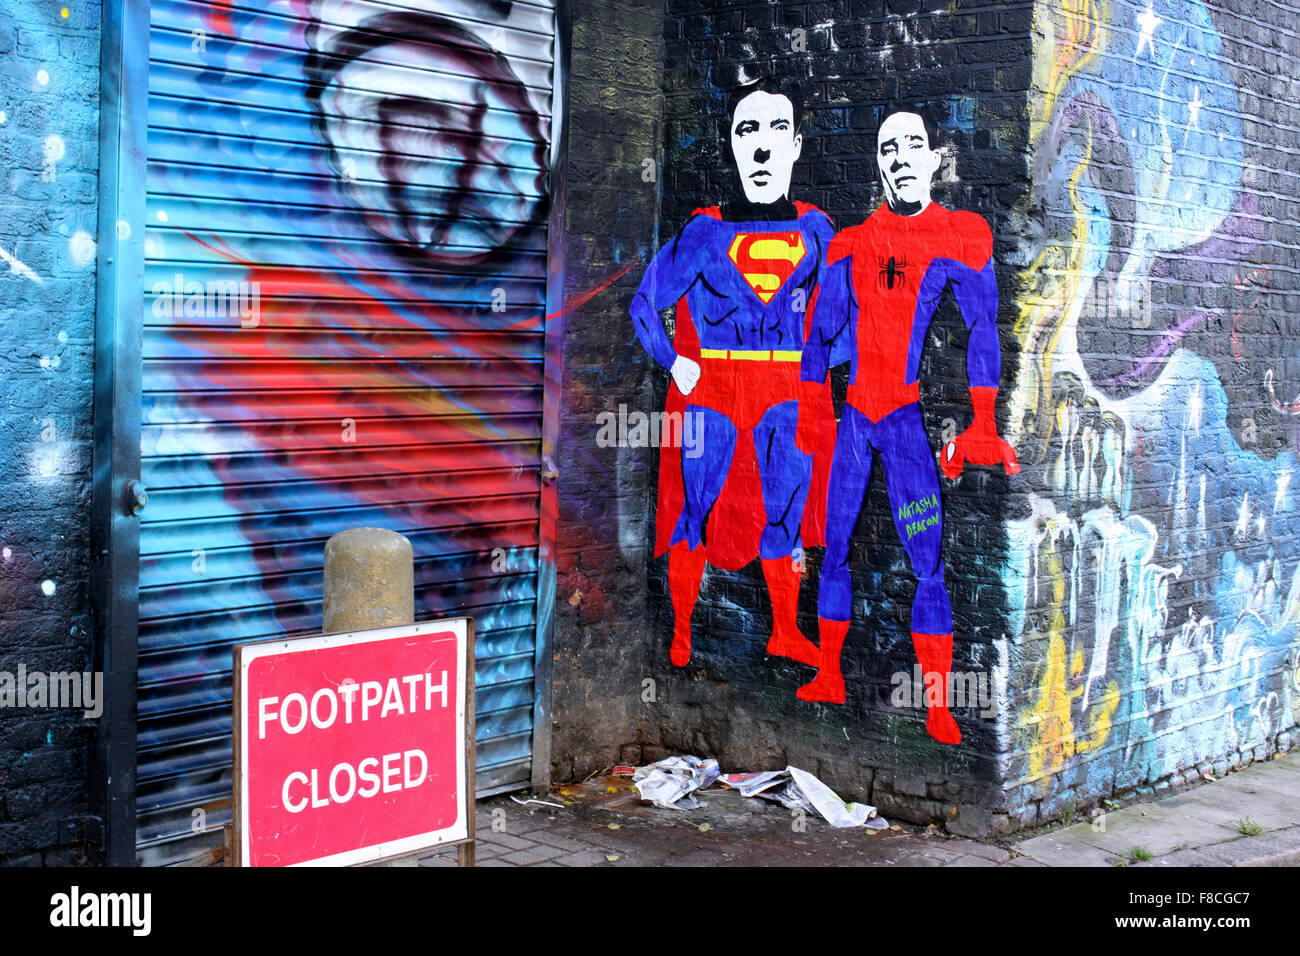 Street art featuring the Kray Twins on a wall in Shoreditch, east London Stock Photo